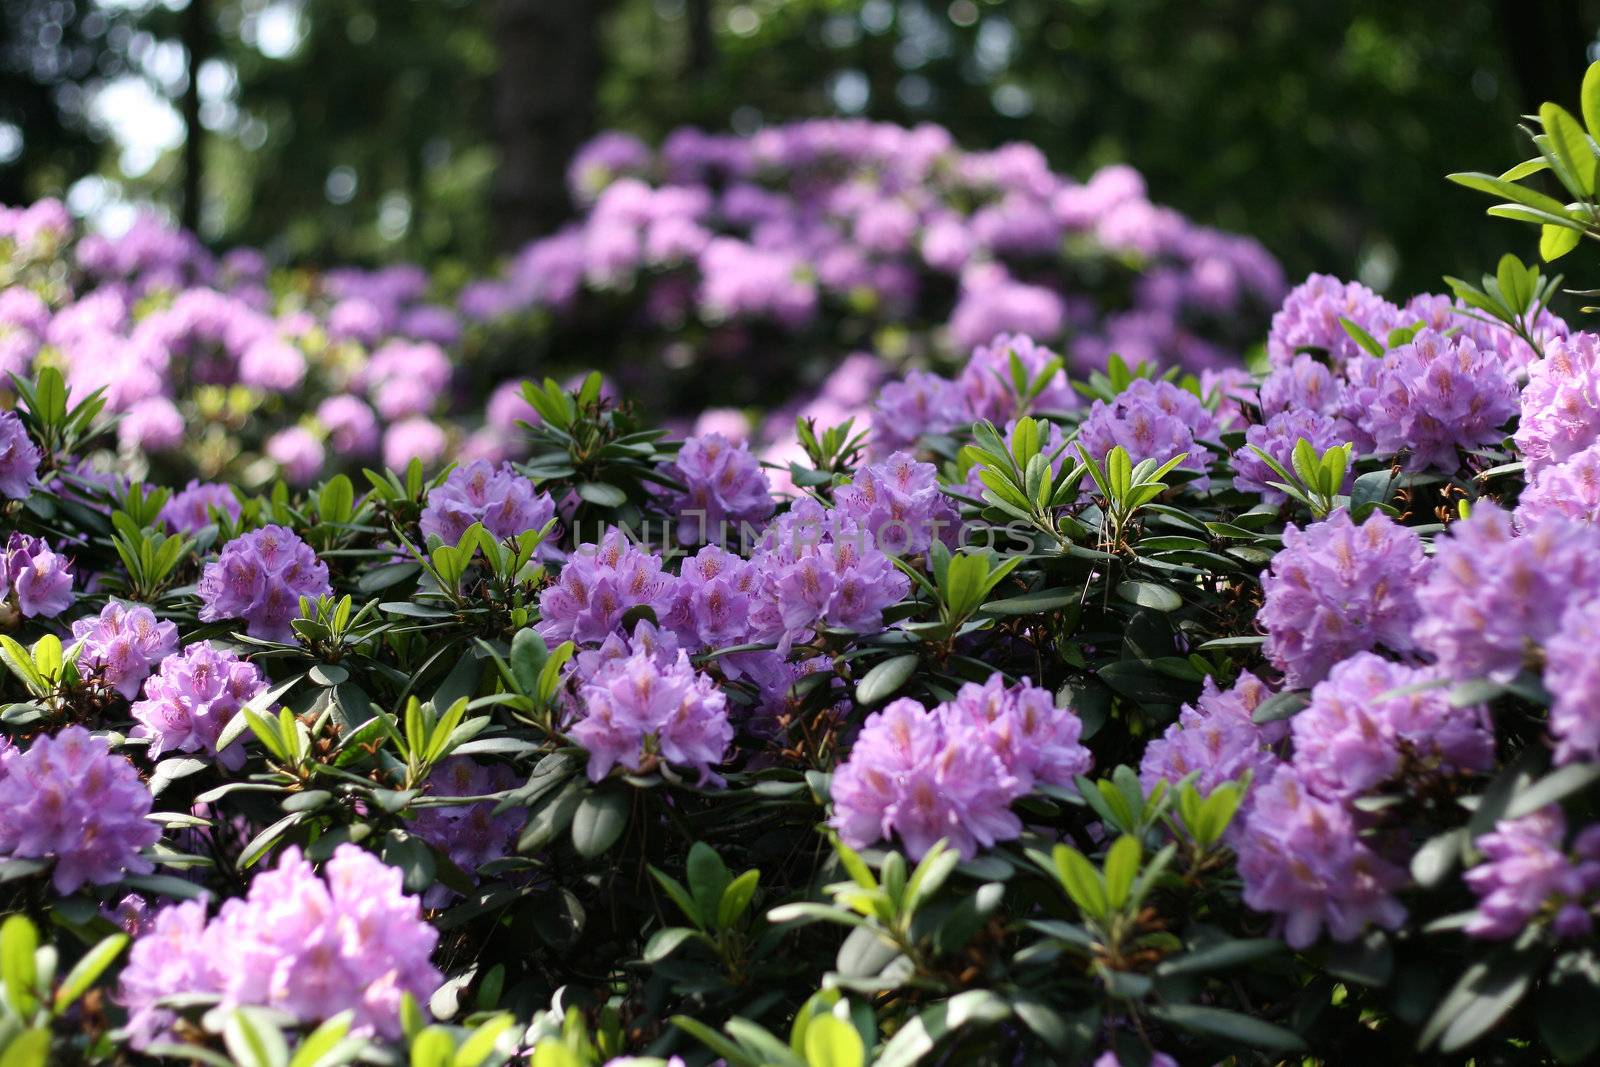 rhododendron growing in the park, Wroclaw, Poland